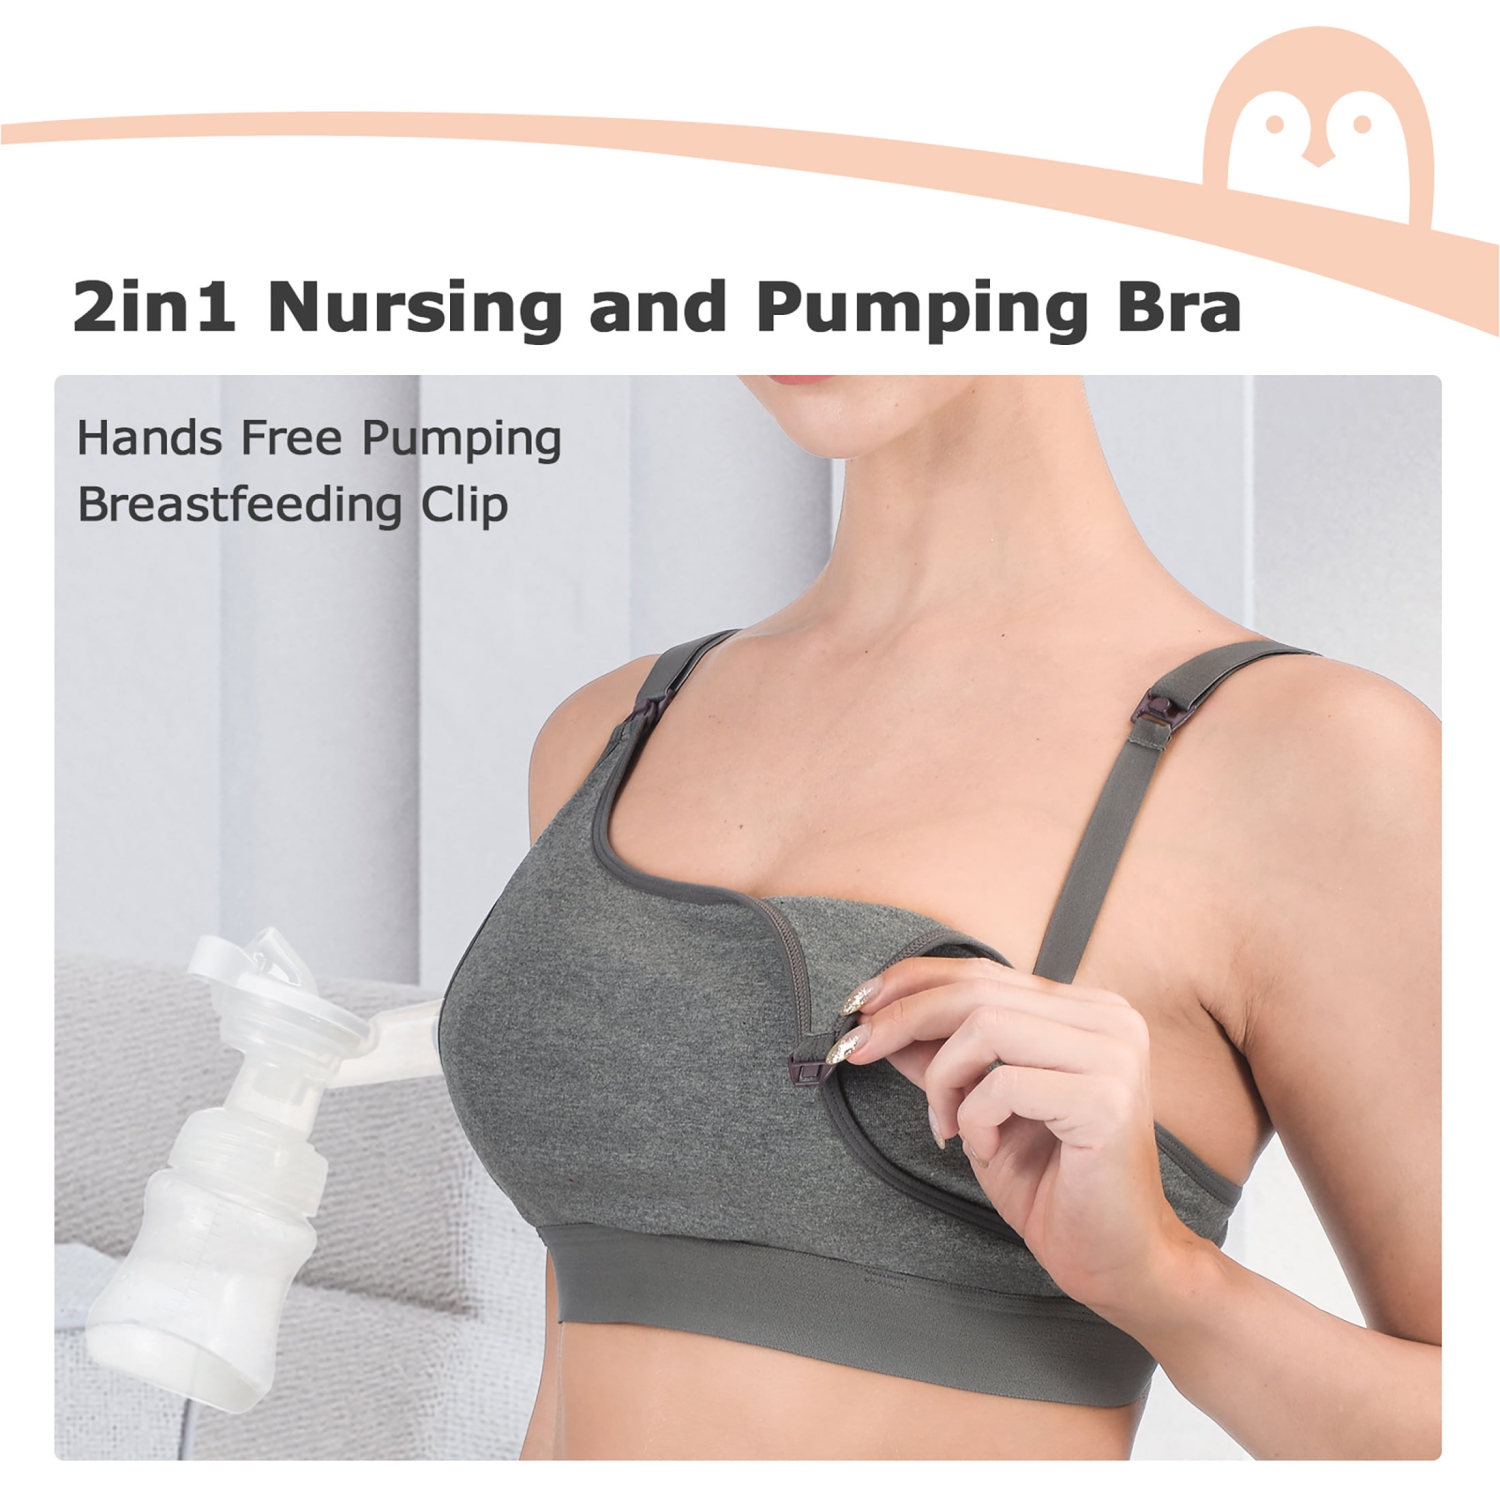 Hands Free Pumping Bra, Adjustable Breast-pumps Holding And Nursing Bra,  Suitable For Breastfeeding-pumps By Lansinoh, Philips Avent, Spectra,  Evenfl